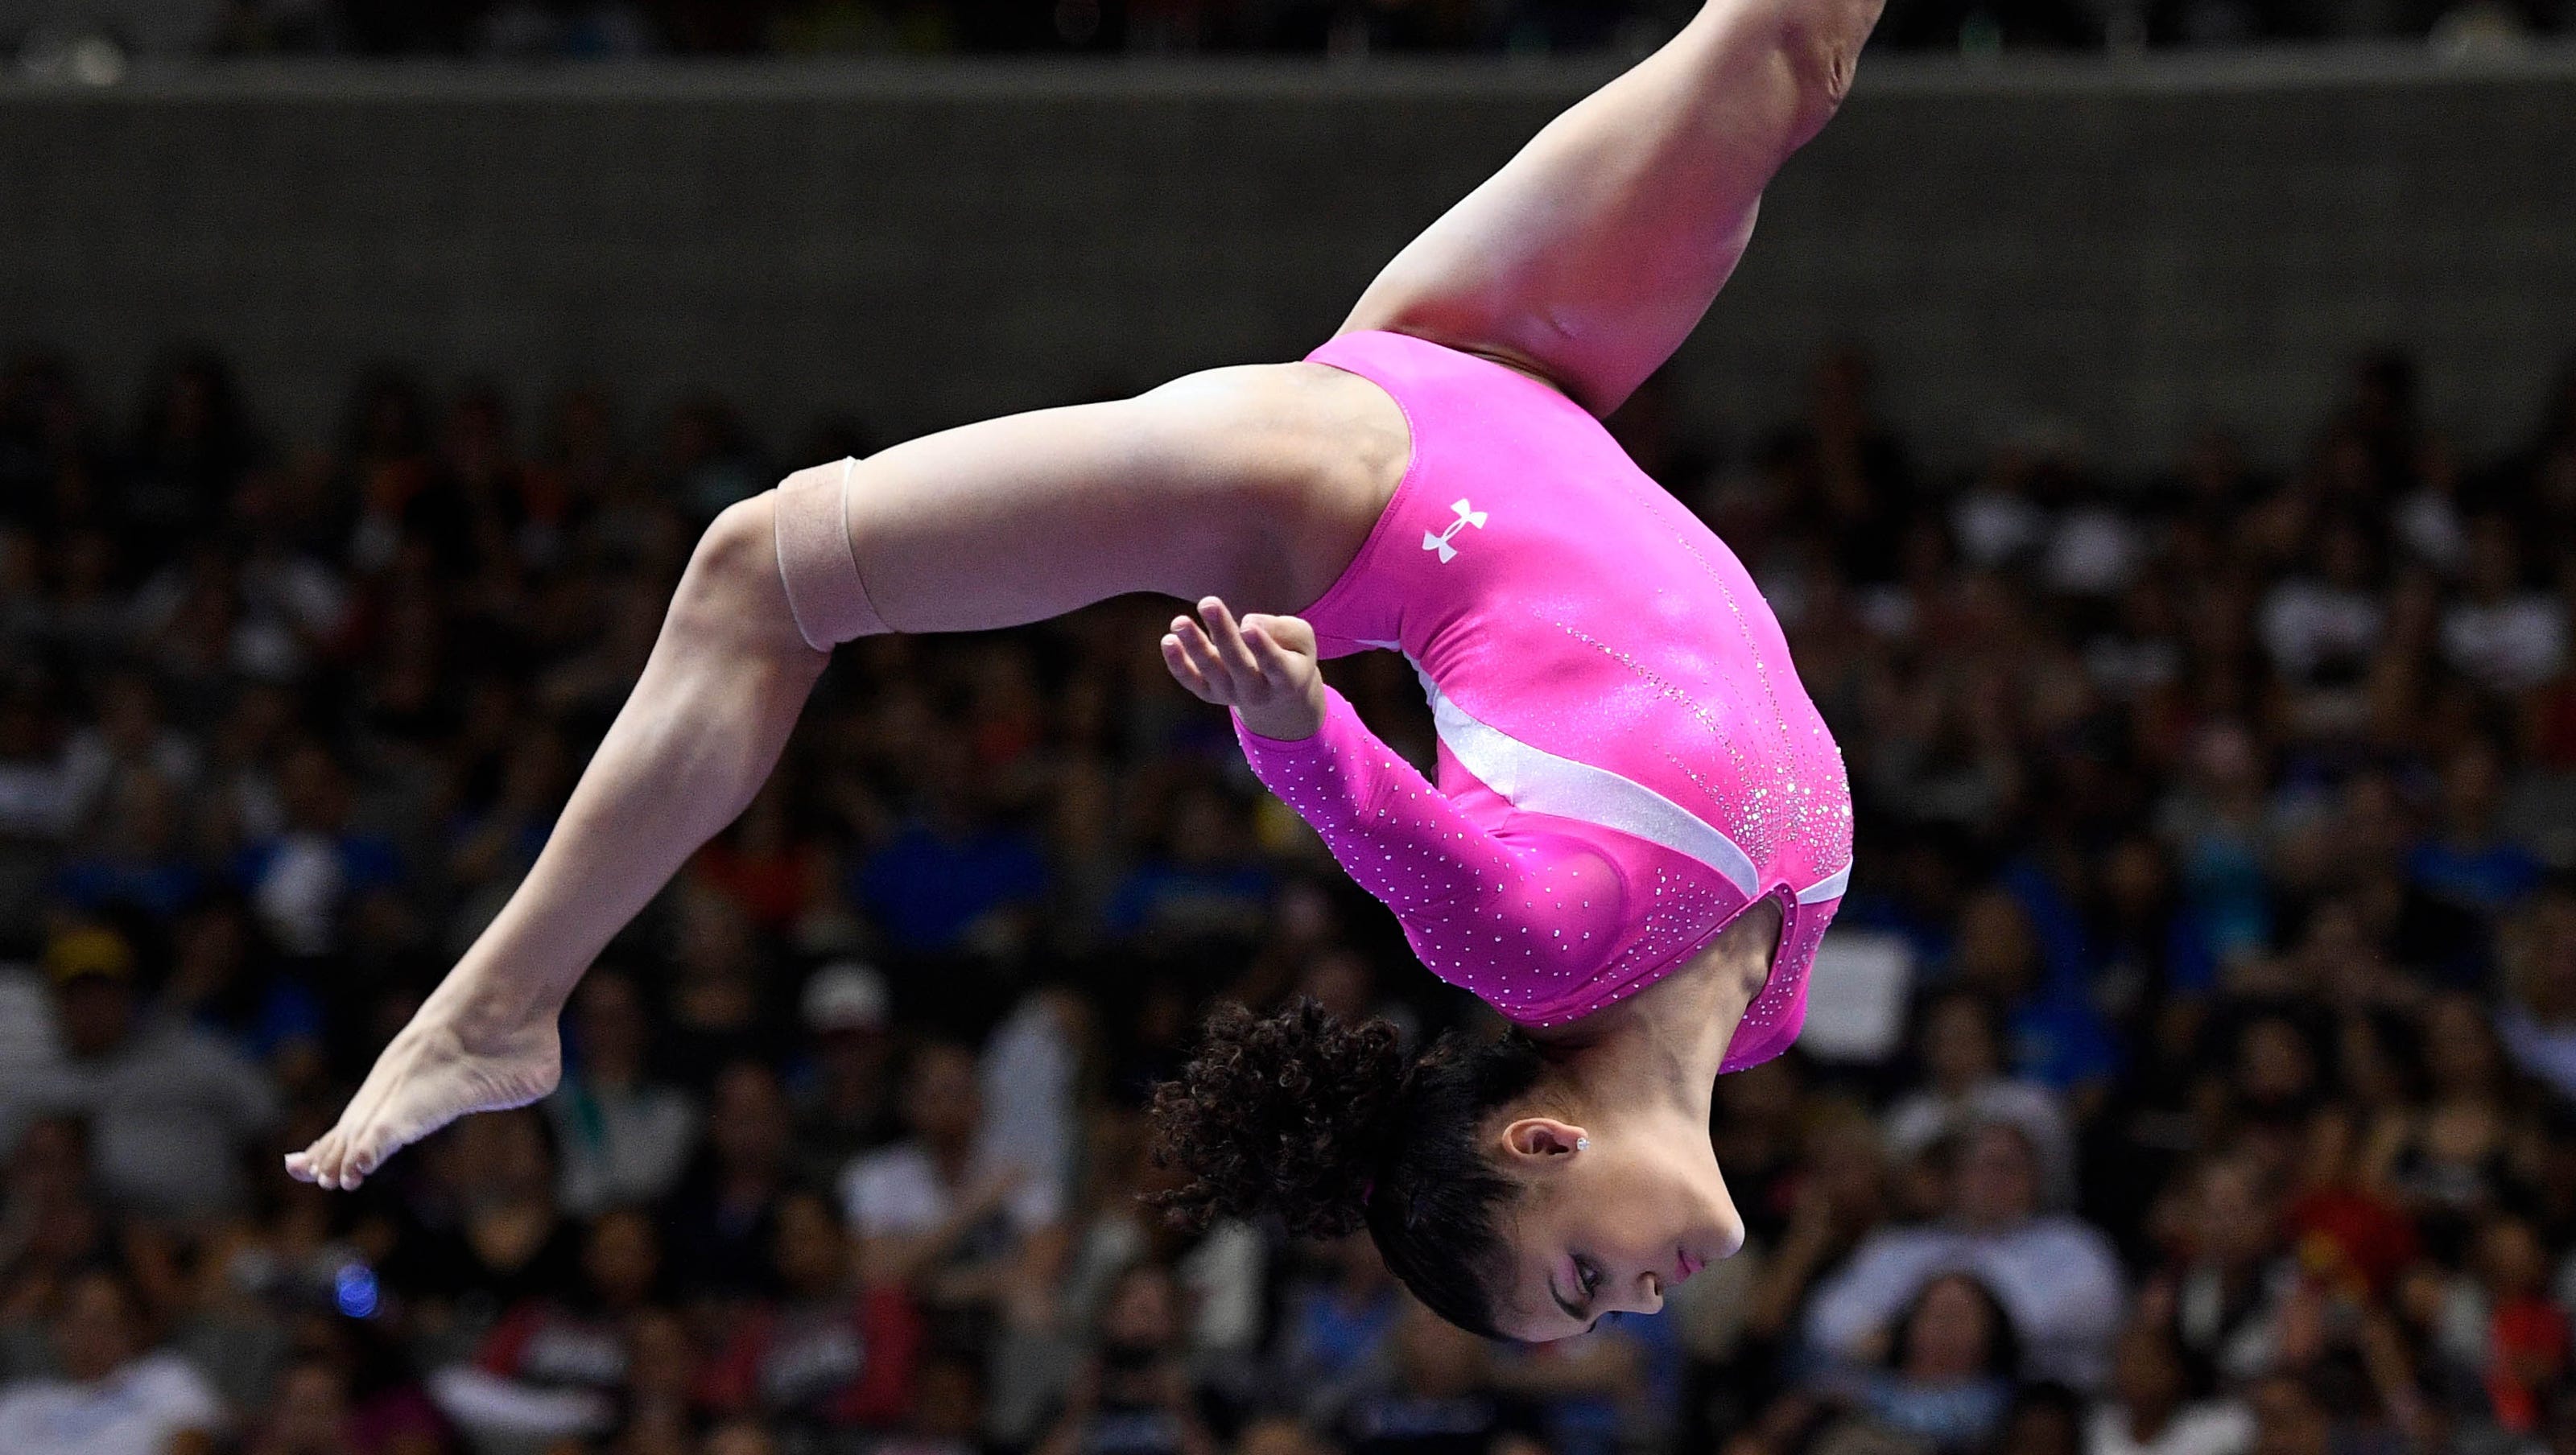 QandA: On the mat with Laurie Hernandez.